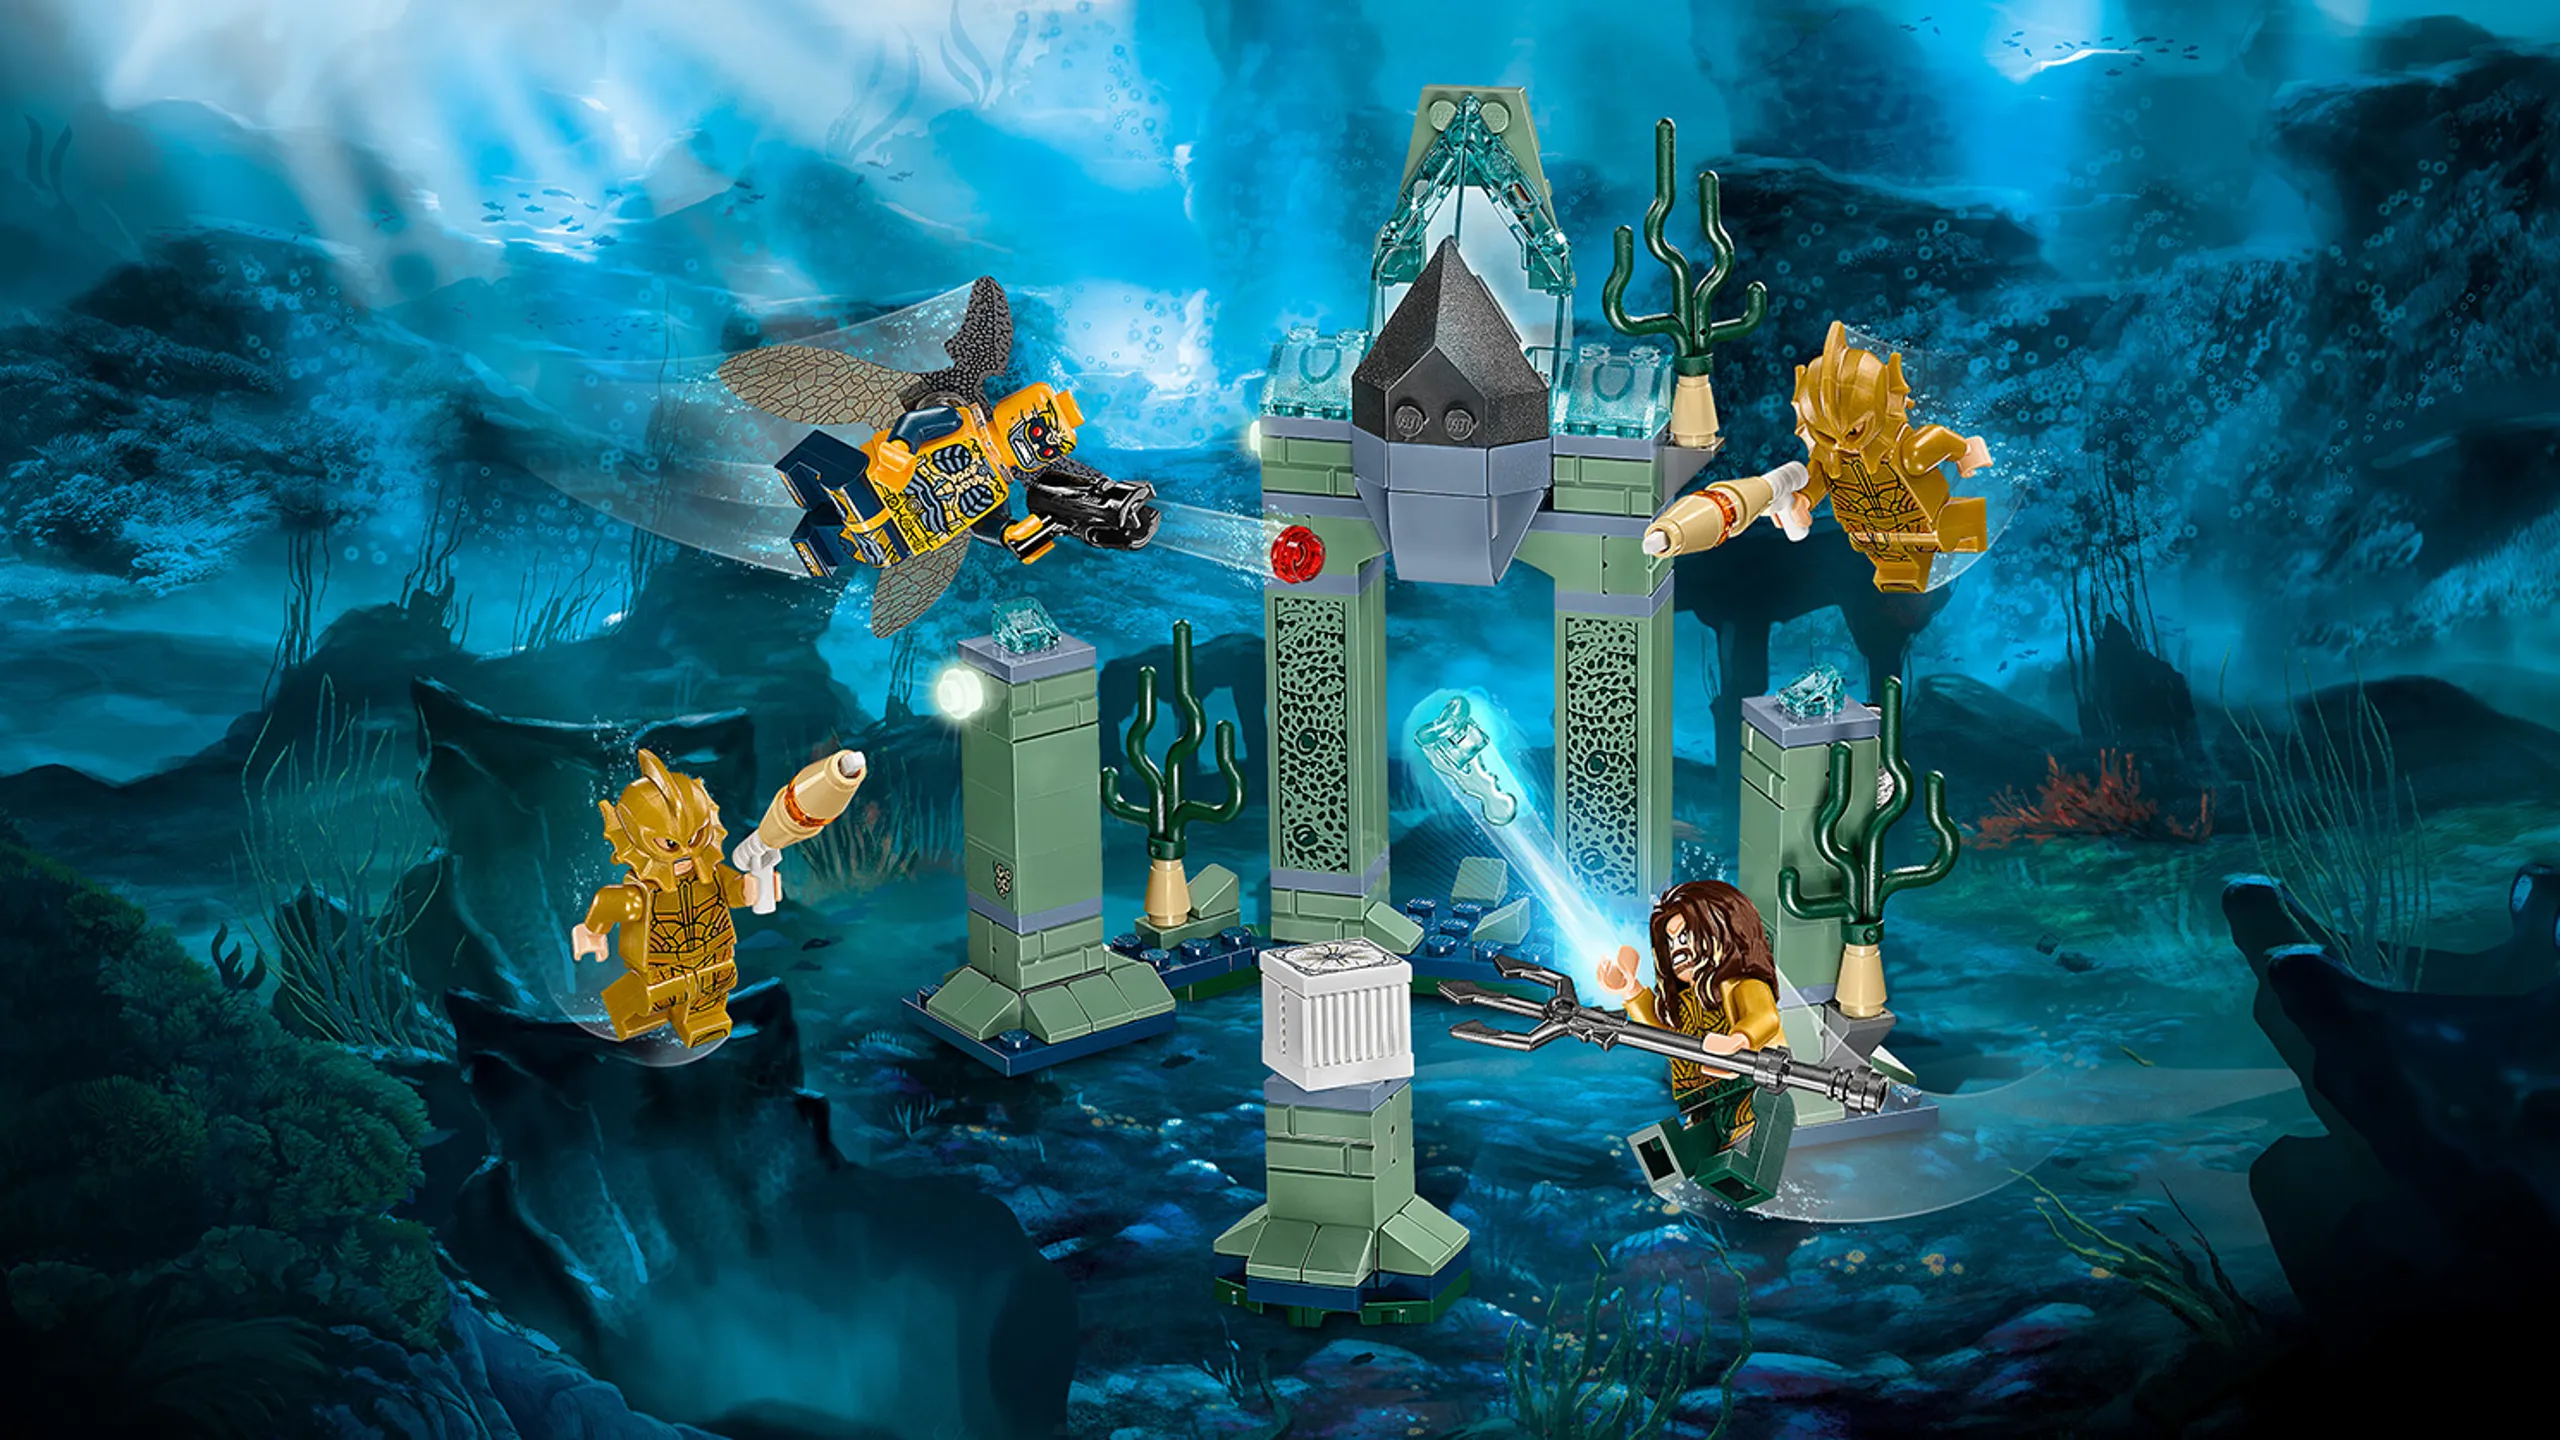 LEGO Super Heroes - 76085 Battle of Atlantis - The Parademon tries to steal the Mother Box! Fend off the evil invader with Aquaman’s Power Blasts and the Atlantean guards’ PlasmaGuns.